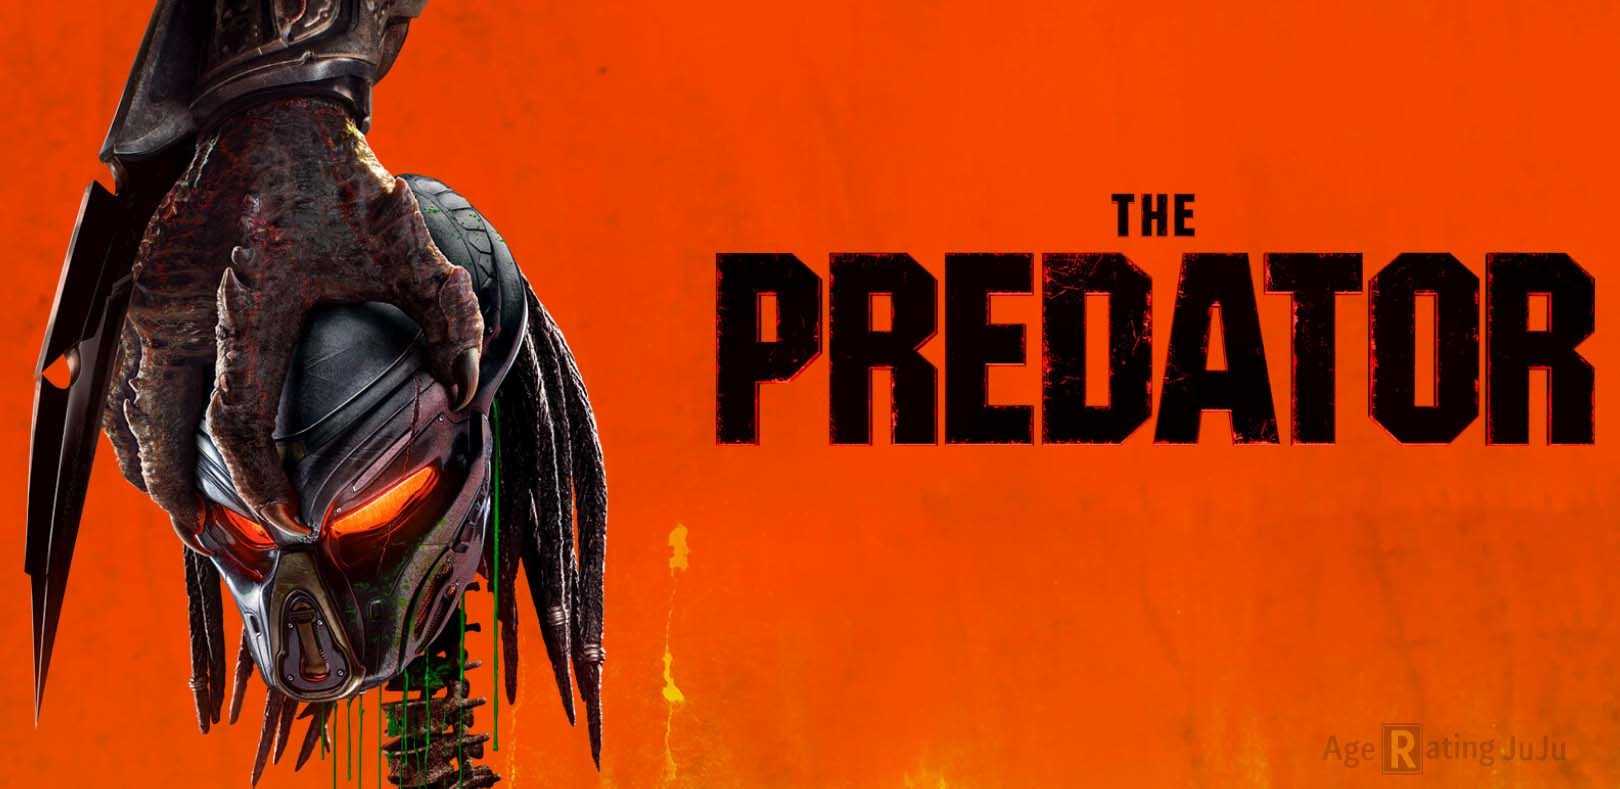 The Predator 2018 Movie Poster Images and Wallpapers